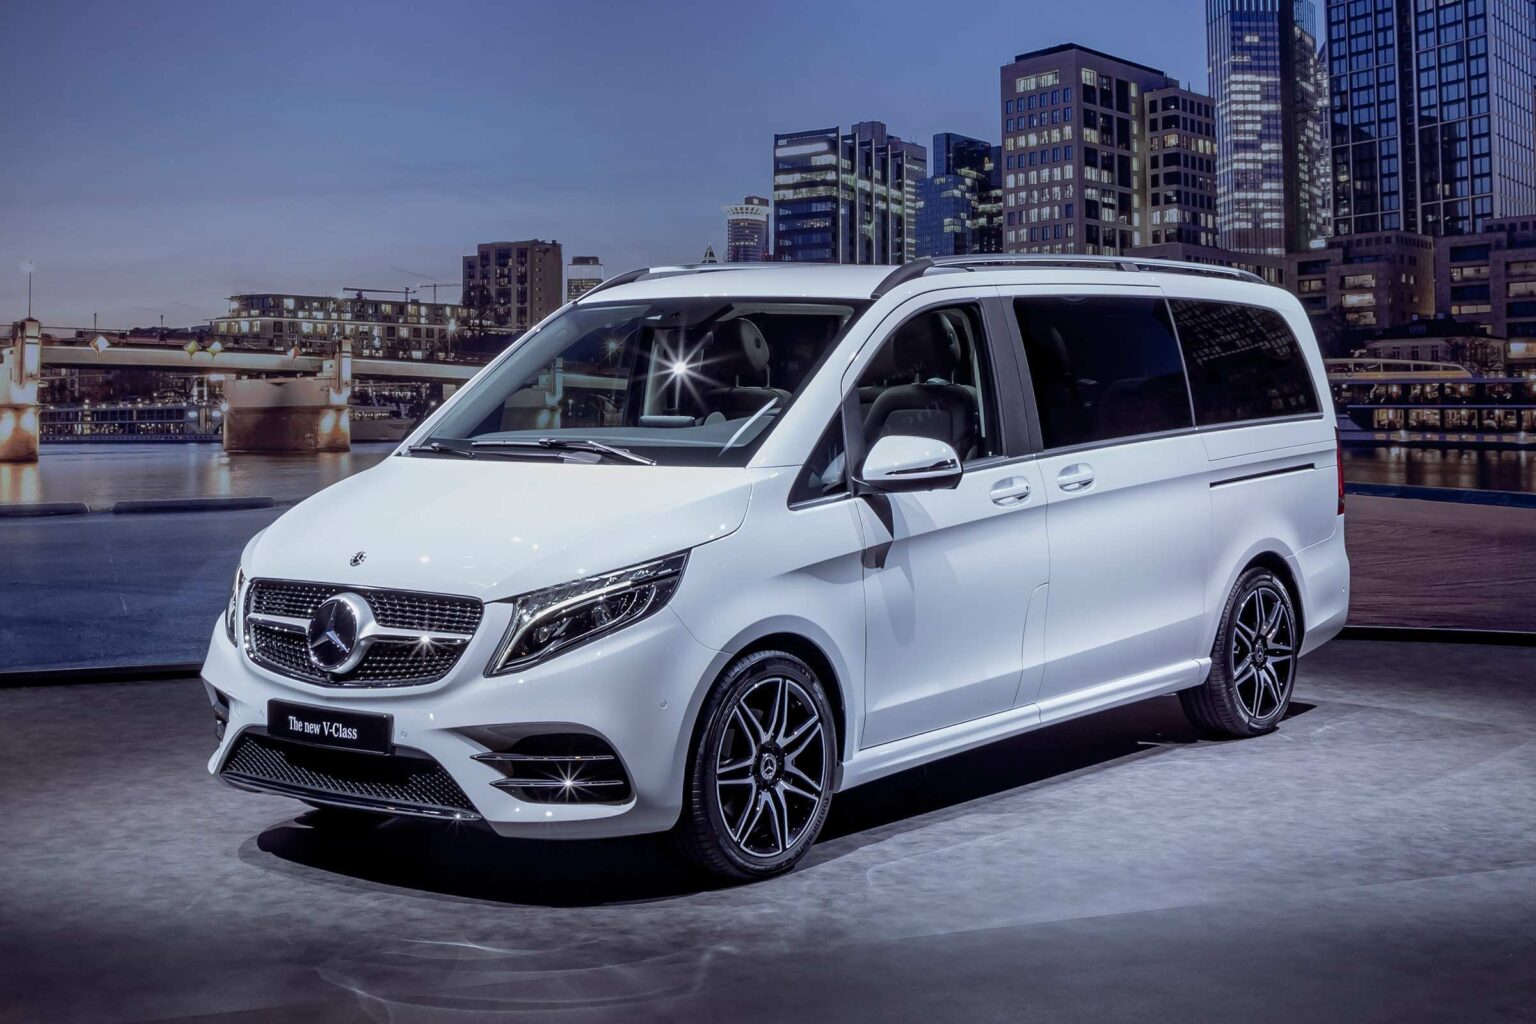 Top Tips for Choosing a Mercedes V-Class for Your Next UK Event